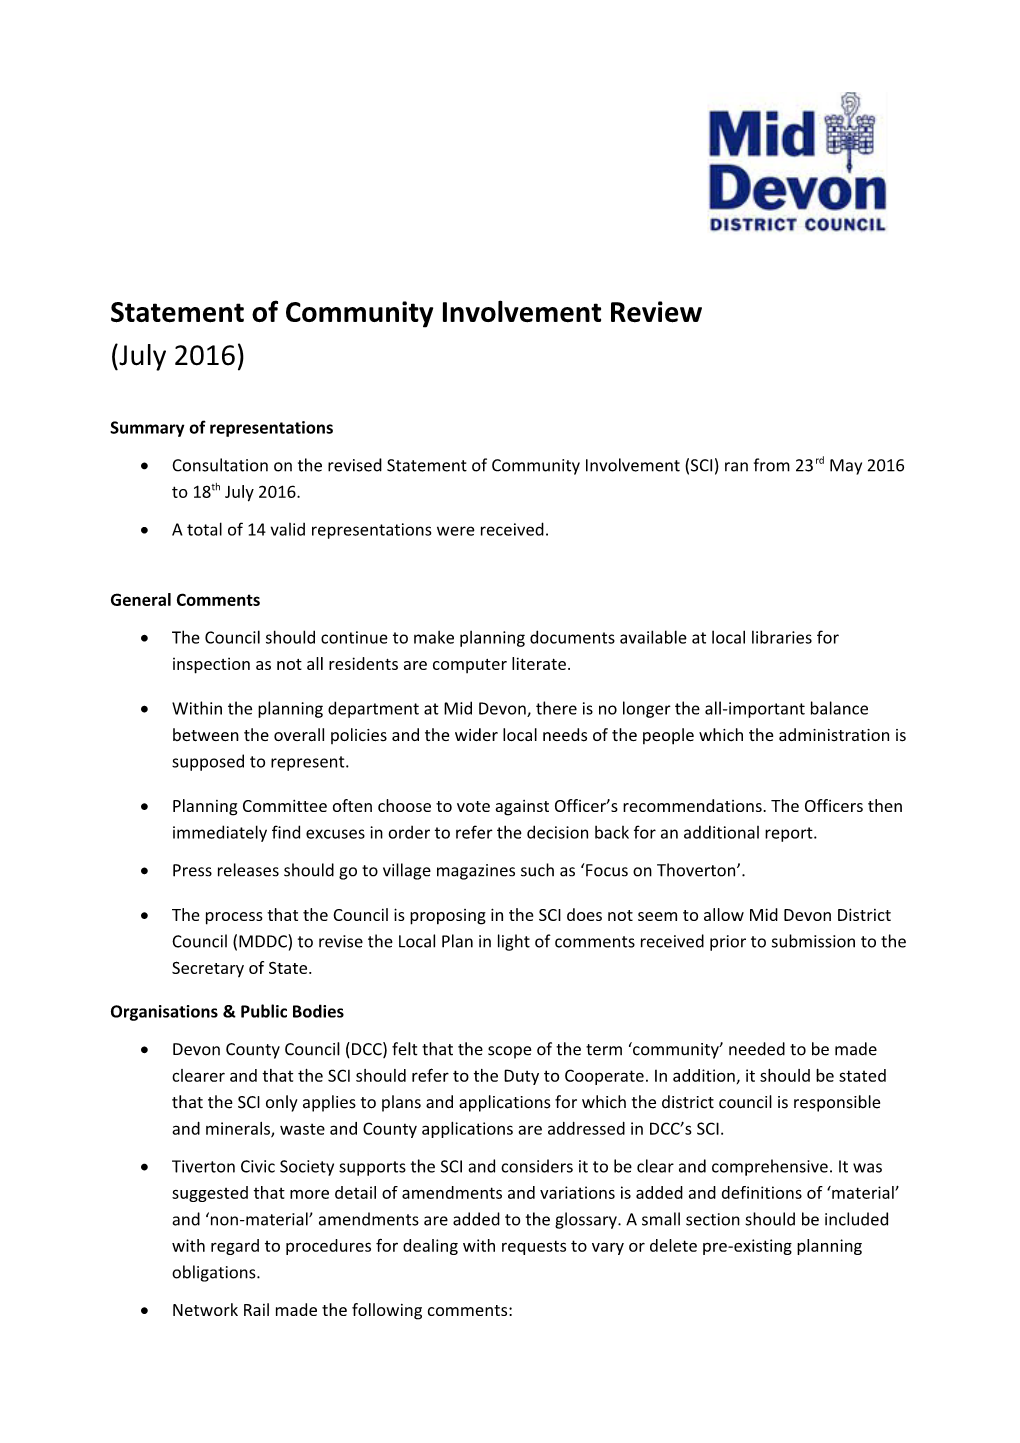 Statement of Community Involvement Review